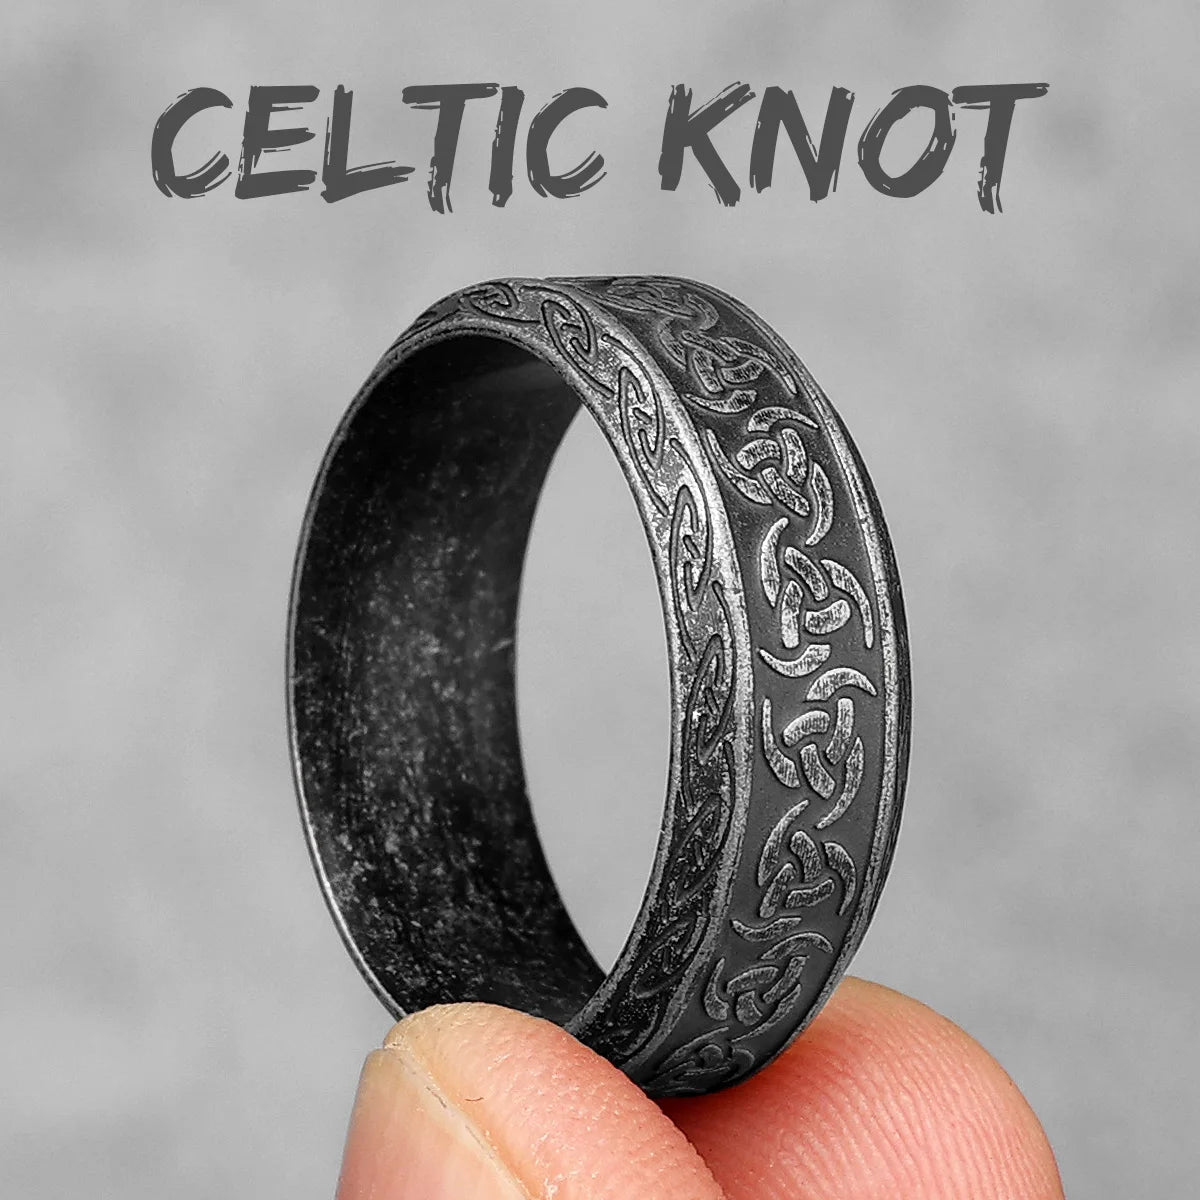 Vintage Edition - Viking Runes Celtic Knot Rings - Mythical Pieces 11 / R1006-Vintage Black